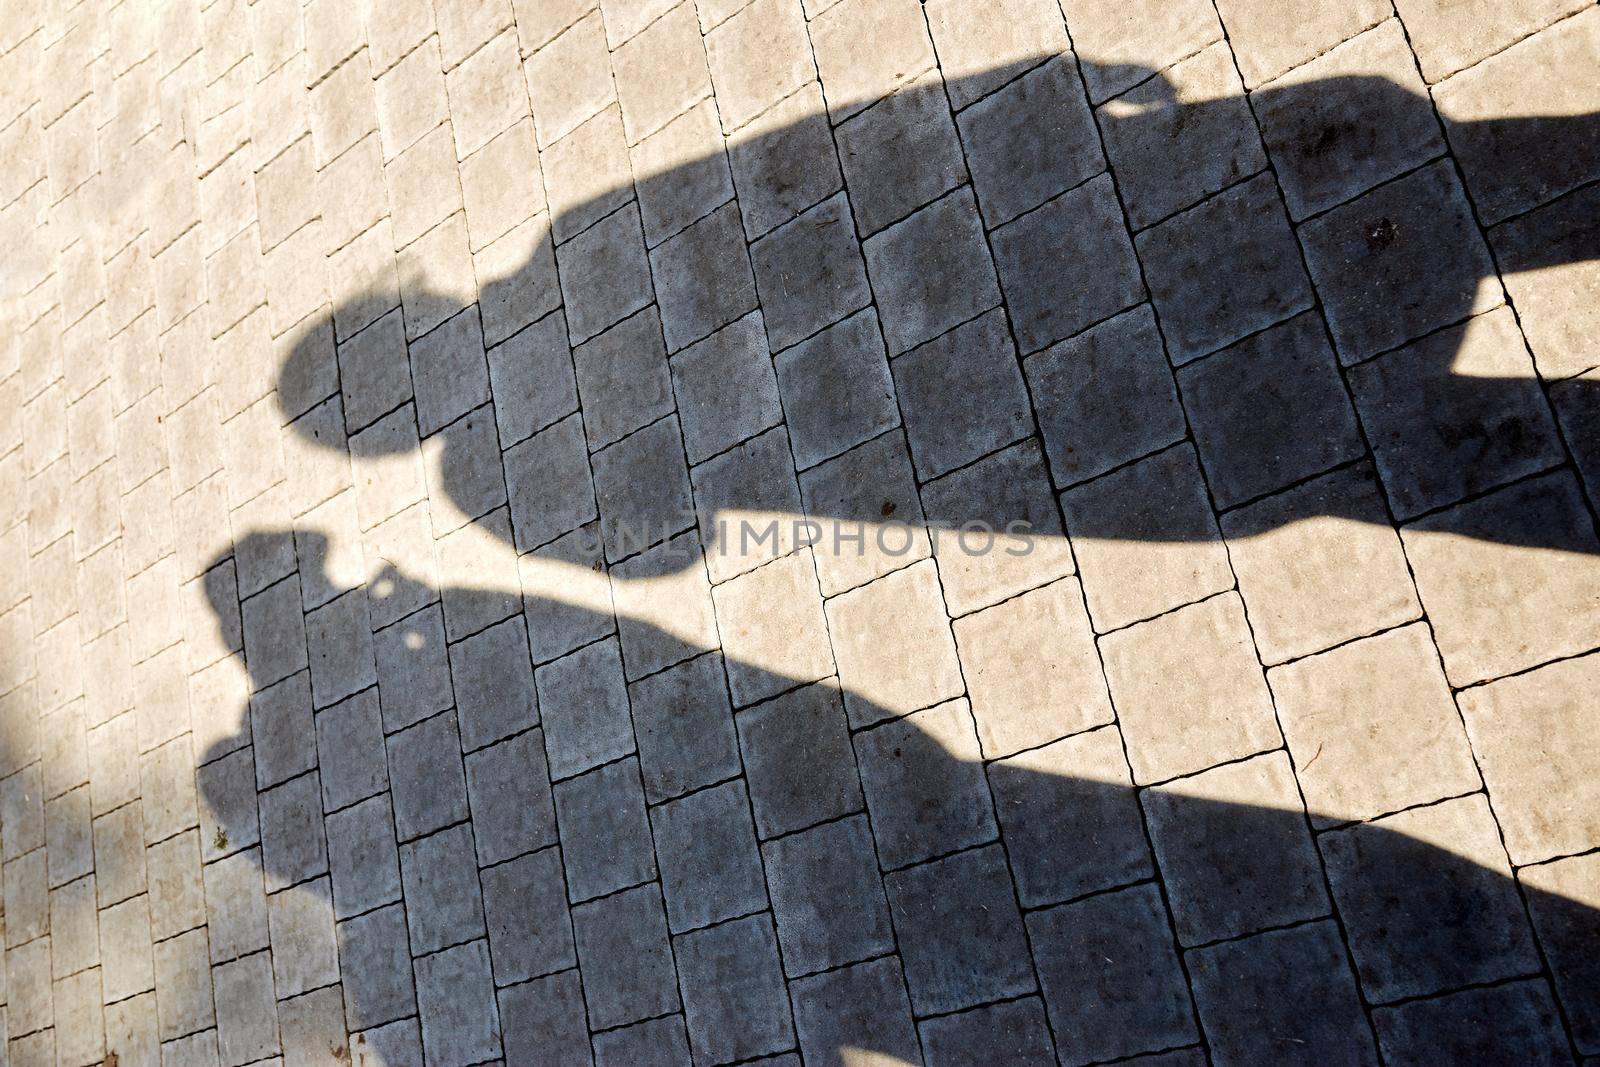 two shadows from the figures on the paving slabs